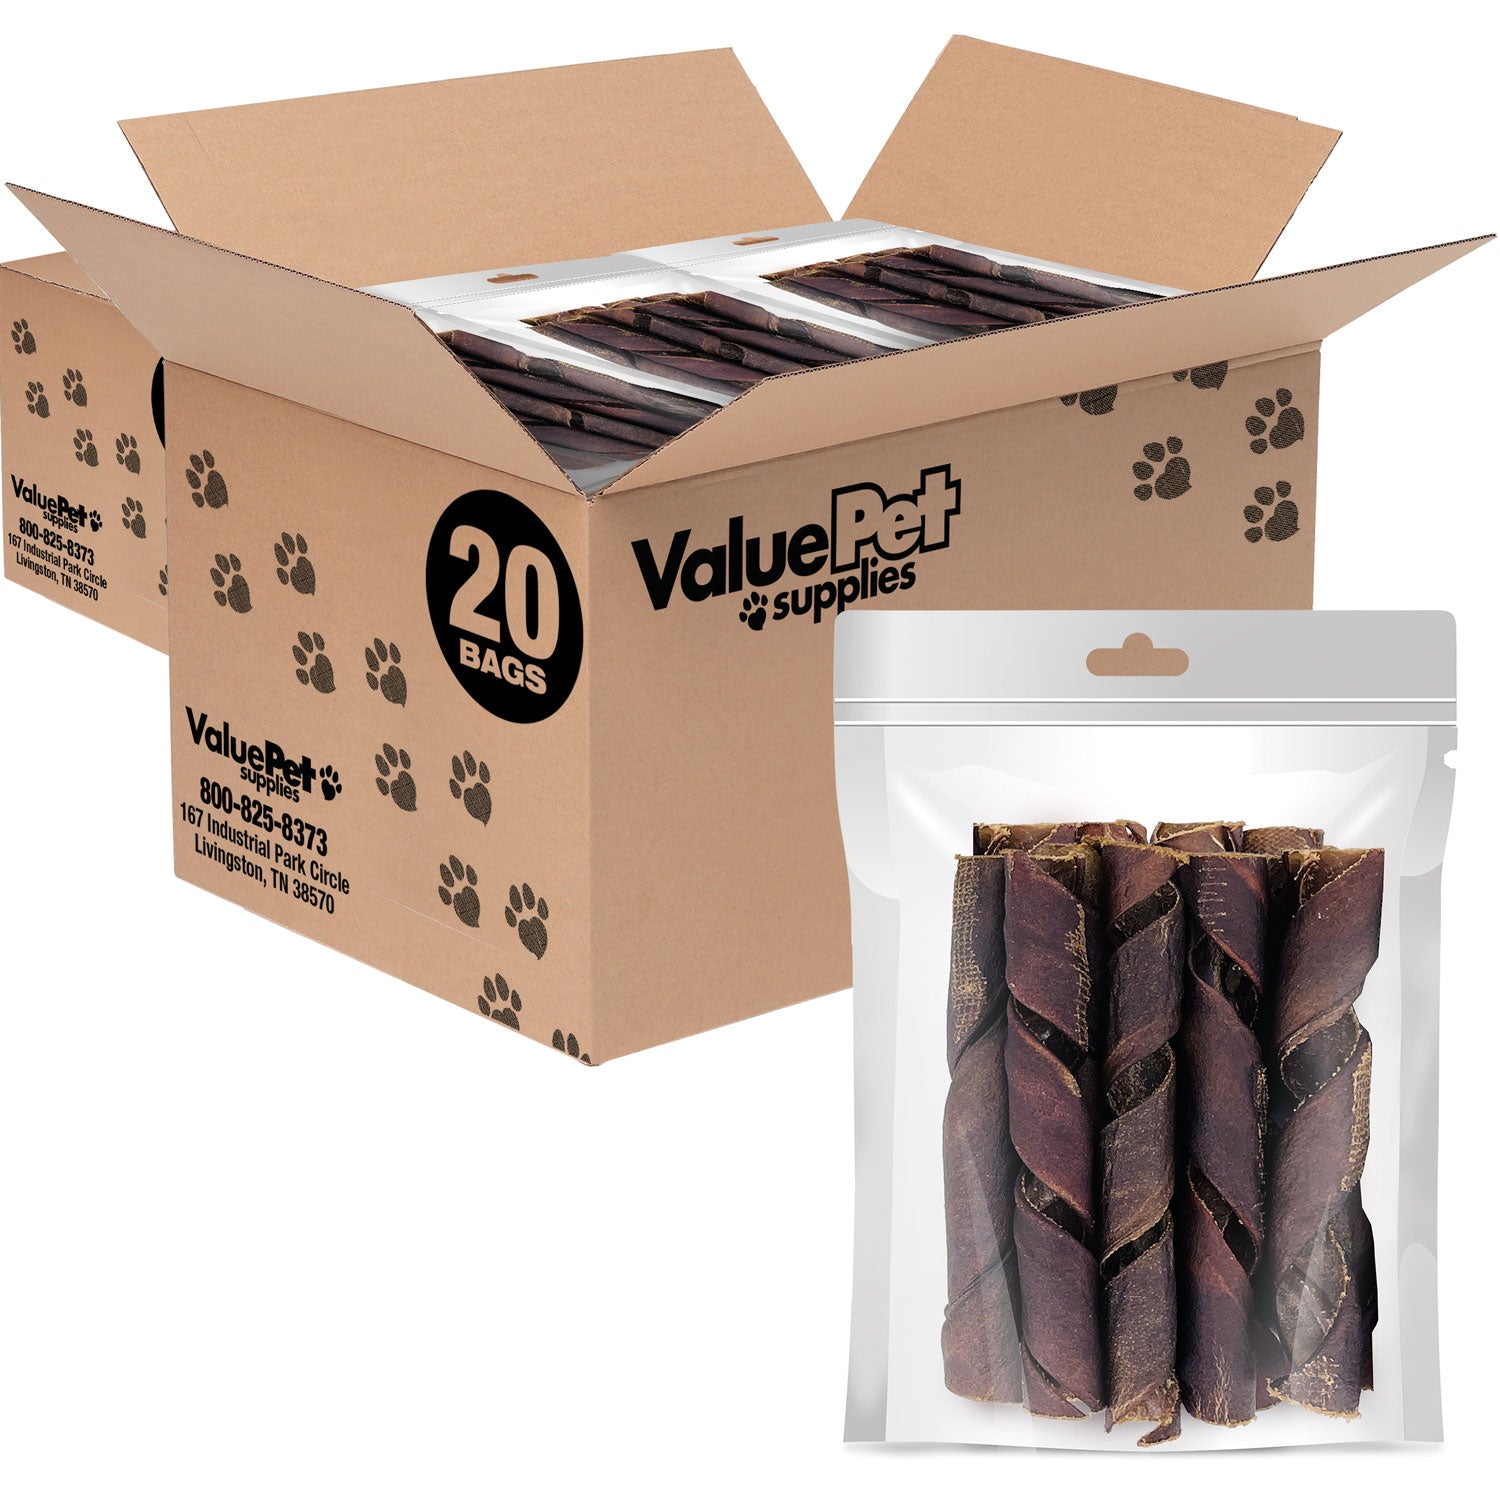 ValueBull USA Collagen Sticks For Small Dogs, Smoked, Thin Spirals, 5-6 Inch, 400 Count RESALE PACKS (40 x 10 Count)